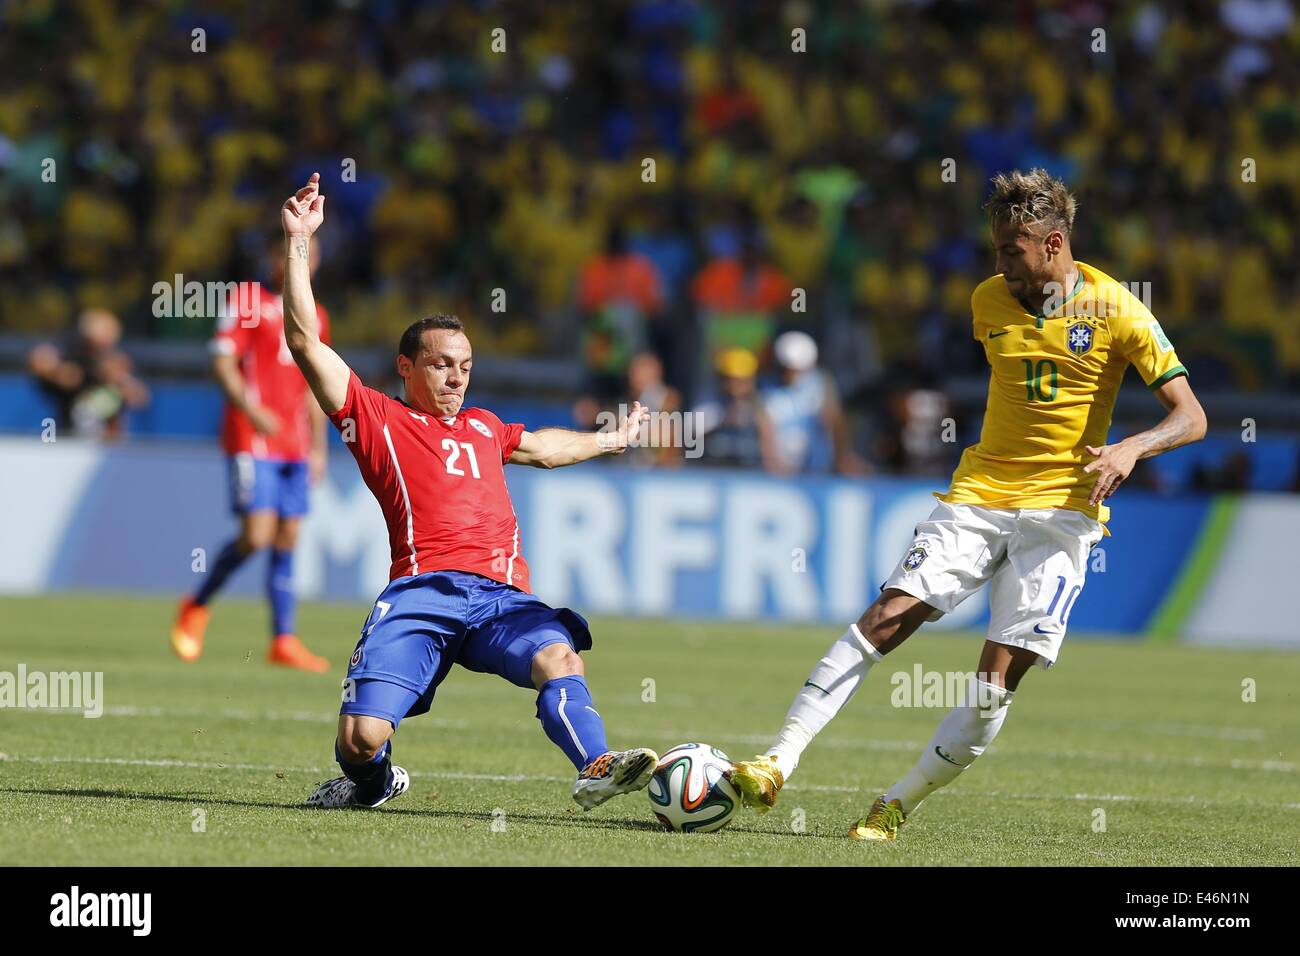 Belo Horizonte, Brazil. 28th June, 2014. (L-R) Marcelo Diaz (CHI), Neymar (BRA) Football/Soccer : FIFA World Cup Brazil 2014 round of 16 match between Brazil and Chile at the Mineirao Stadium in Belo Horizonte, Brazil . © AFLO/Alamy Live News Stock Photo